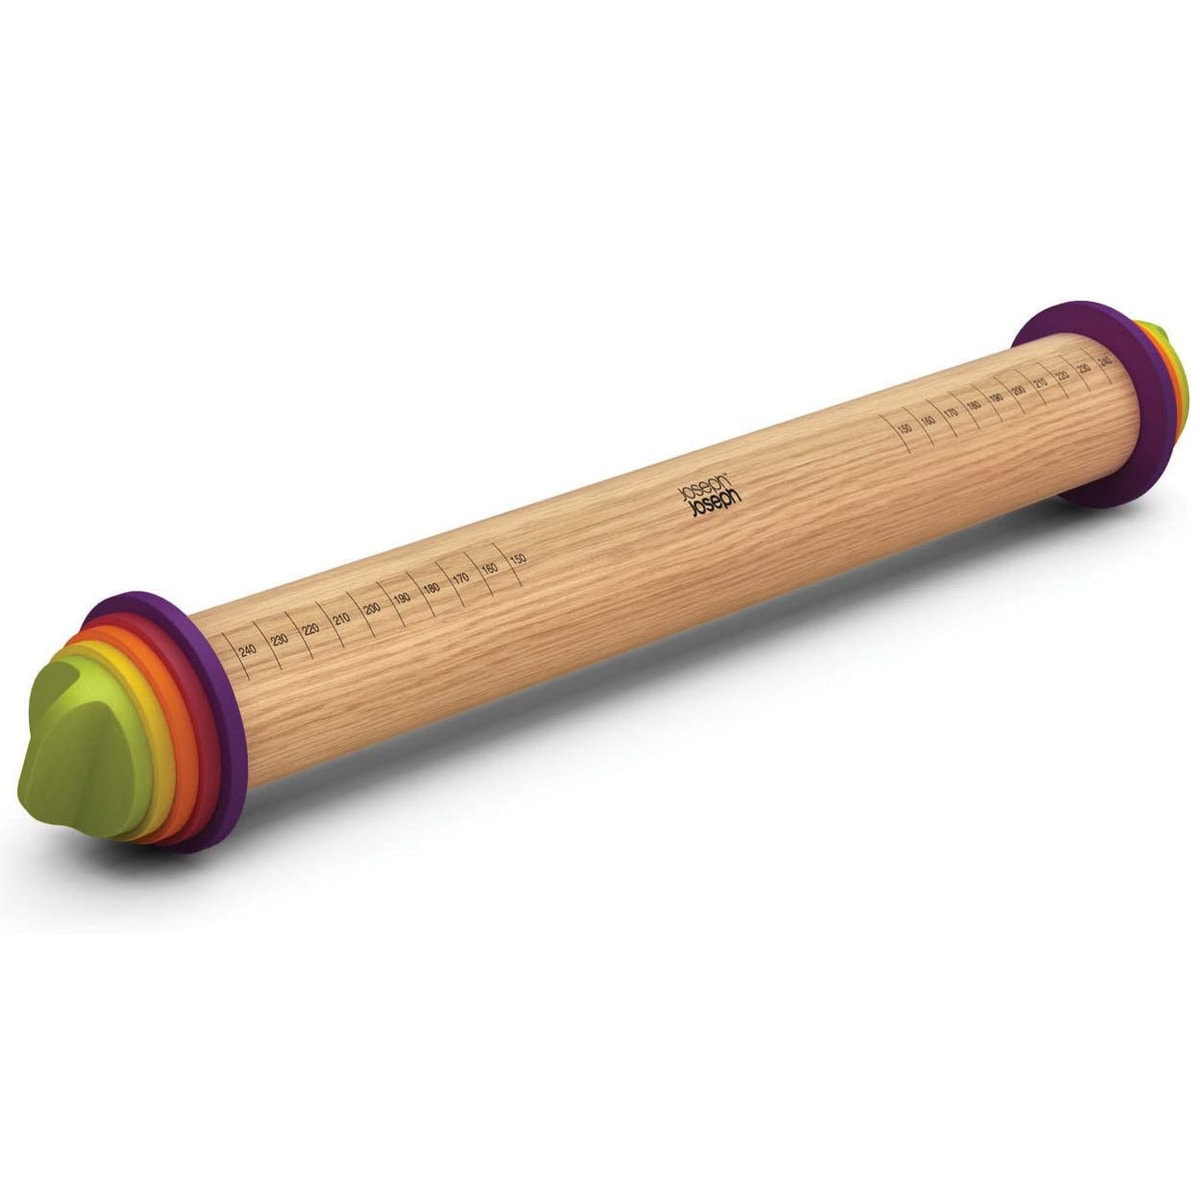 Adjustable rolling pin with removable rings.